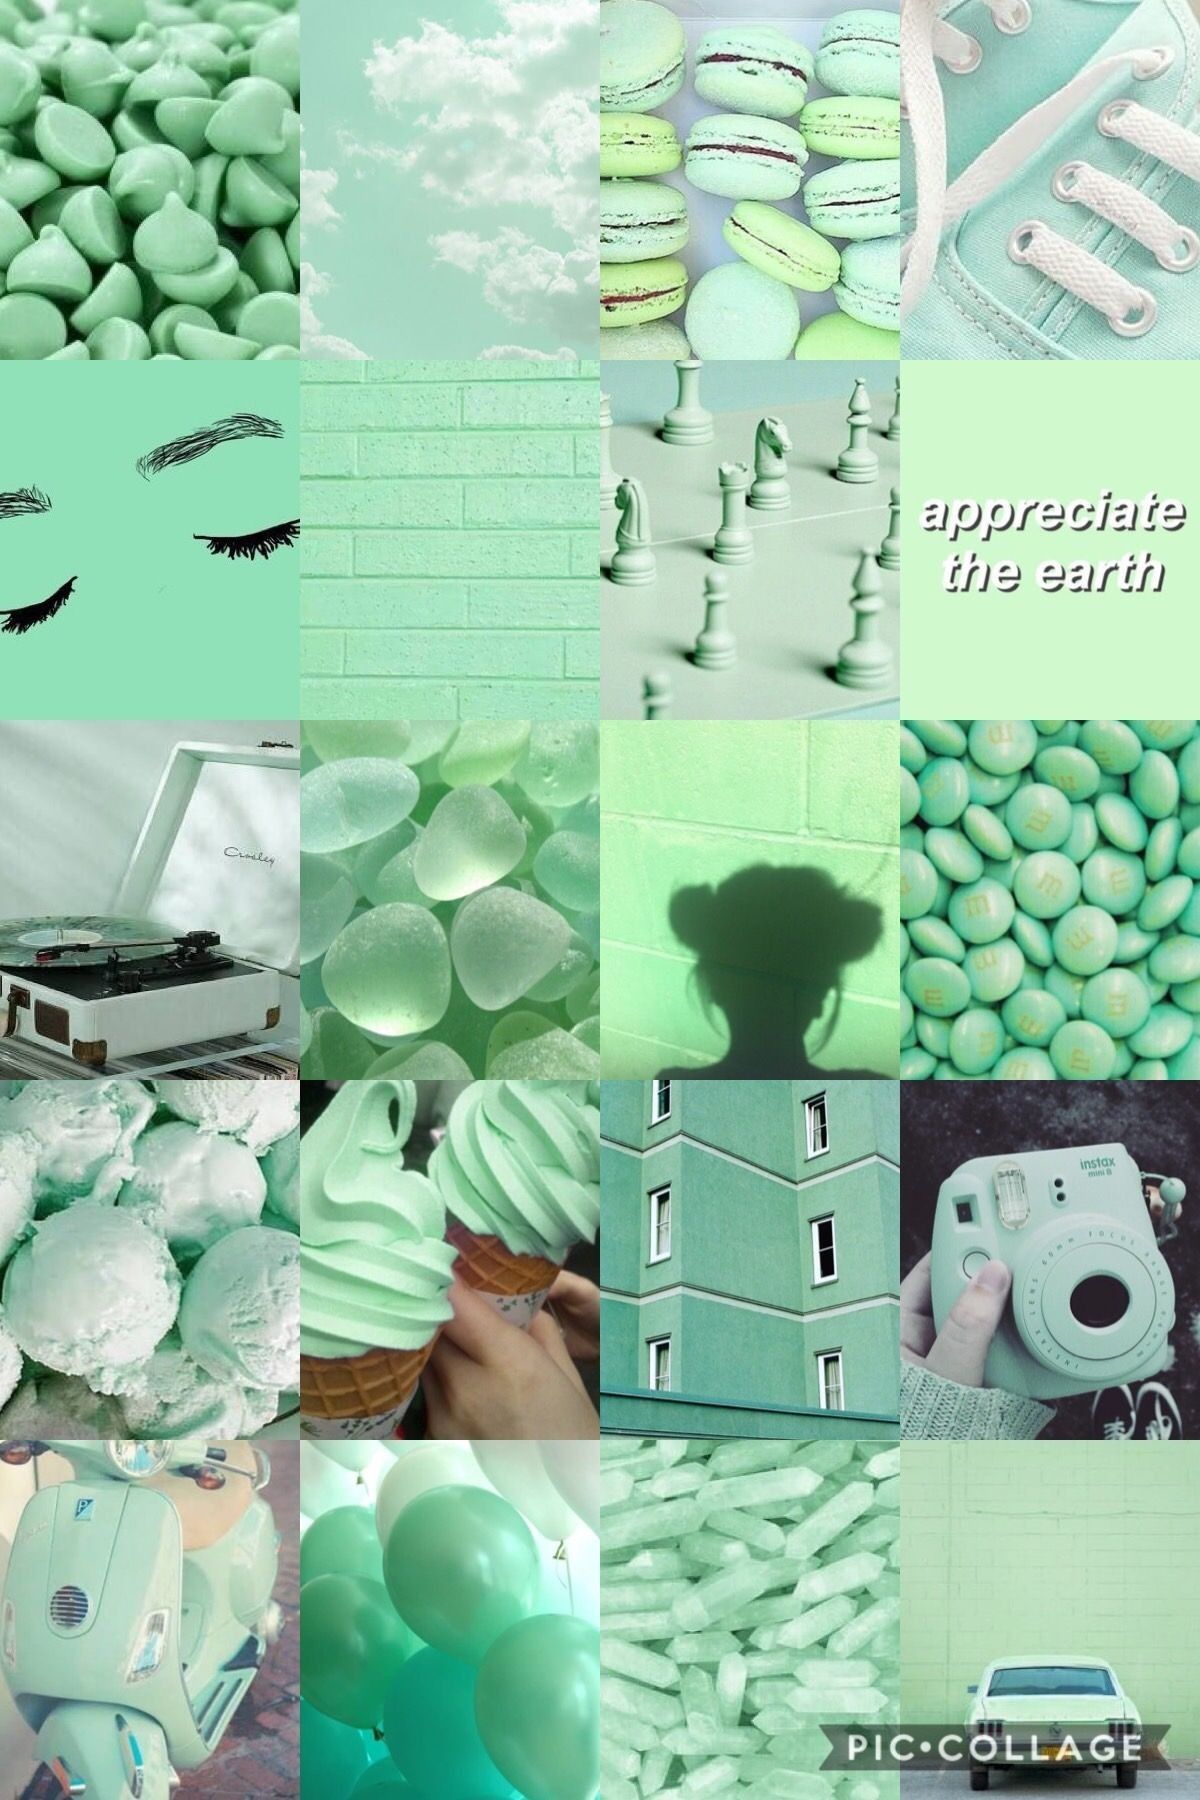 aesthetic pastel mint wallpapers vsco iphone neon mintgreen collage backgrounds webstaqram background gruen collagen wallpapersafari gruene minze aesthetik colorful april